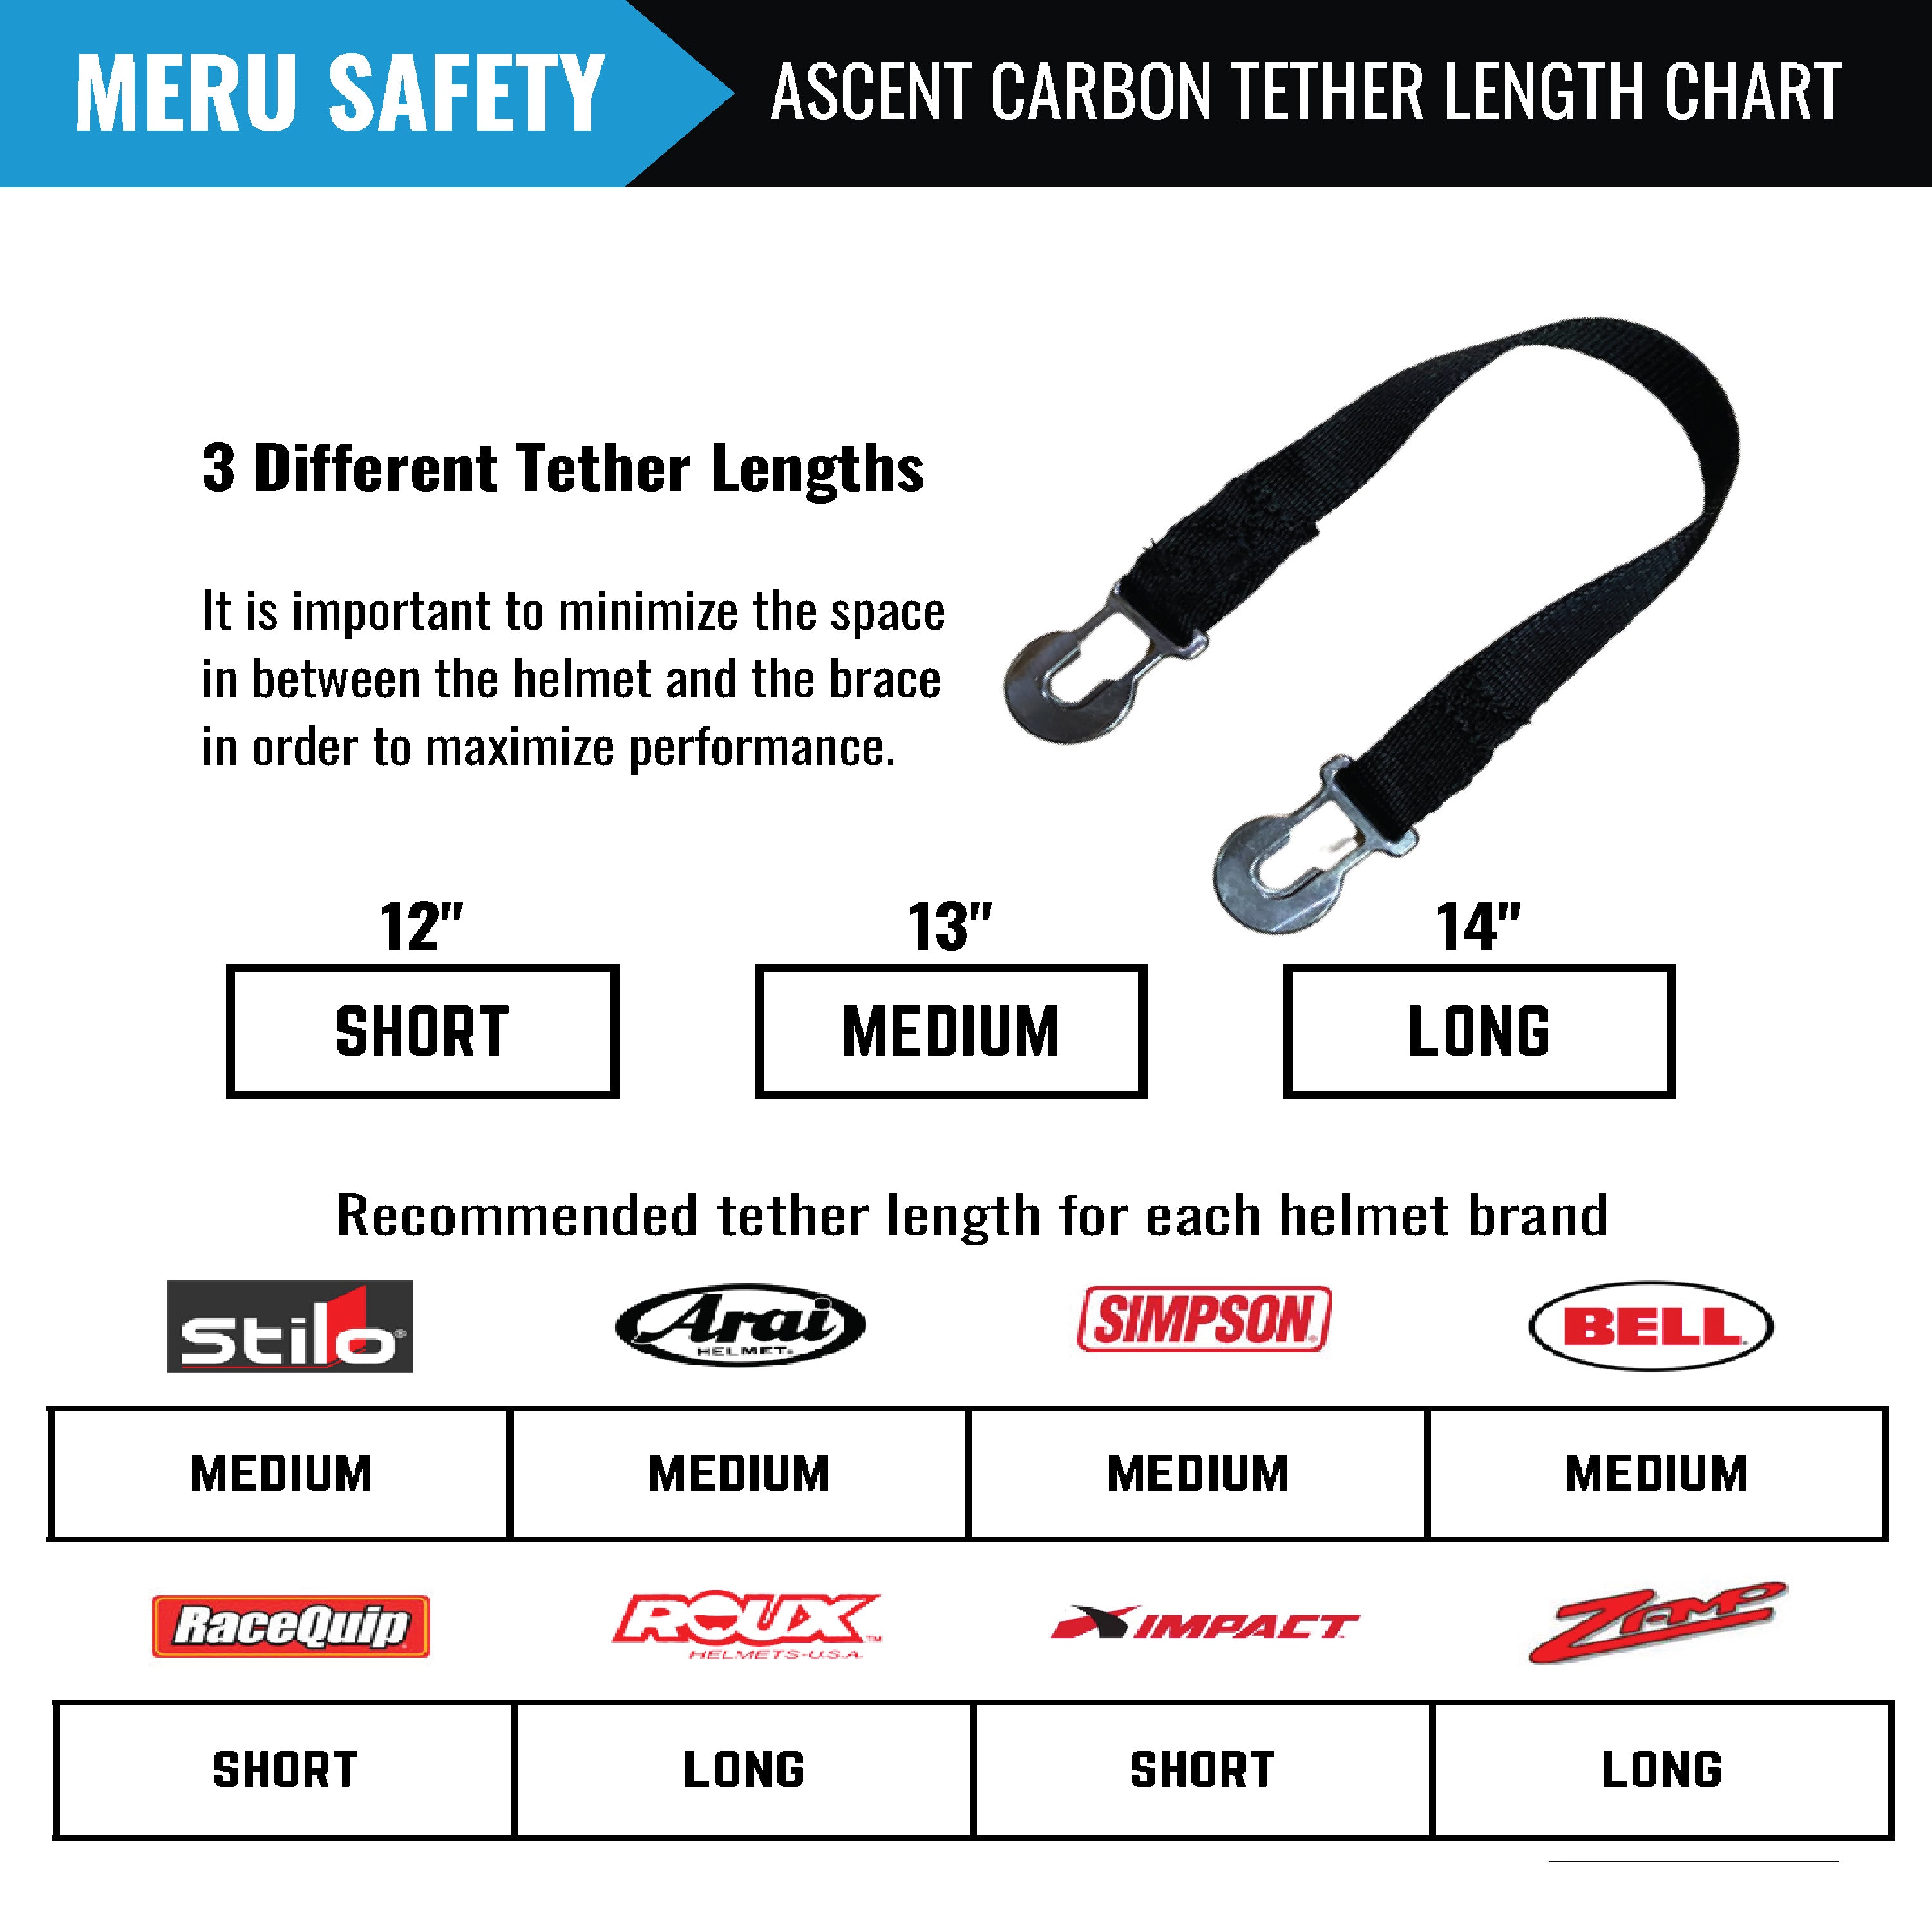 Meru Safety Racing Ascent Carbon Head & Neck Restraint with Quick Release Tethers & Shock Absorber Reduces Force from Frontal Impacts (Large/X-Large)